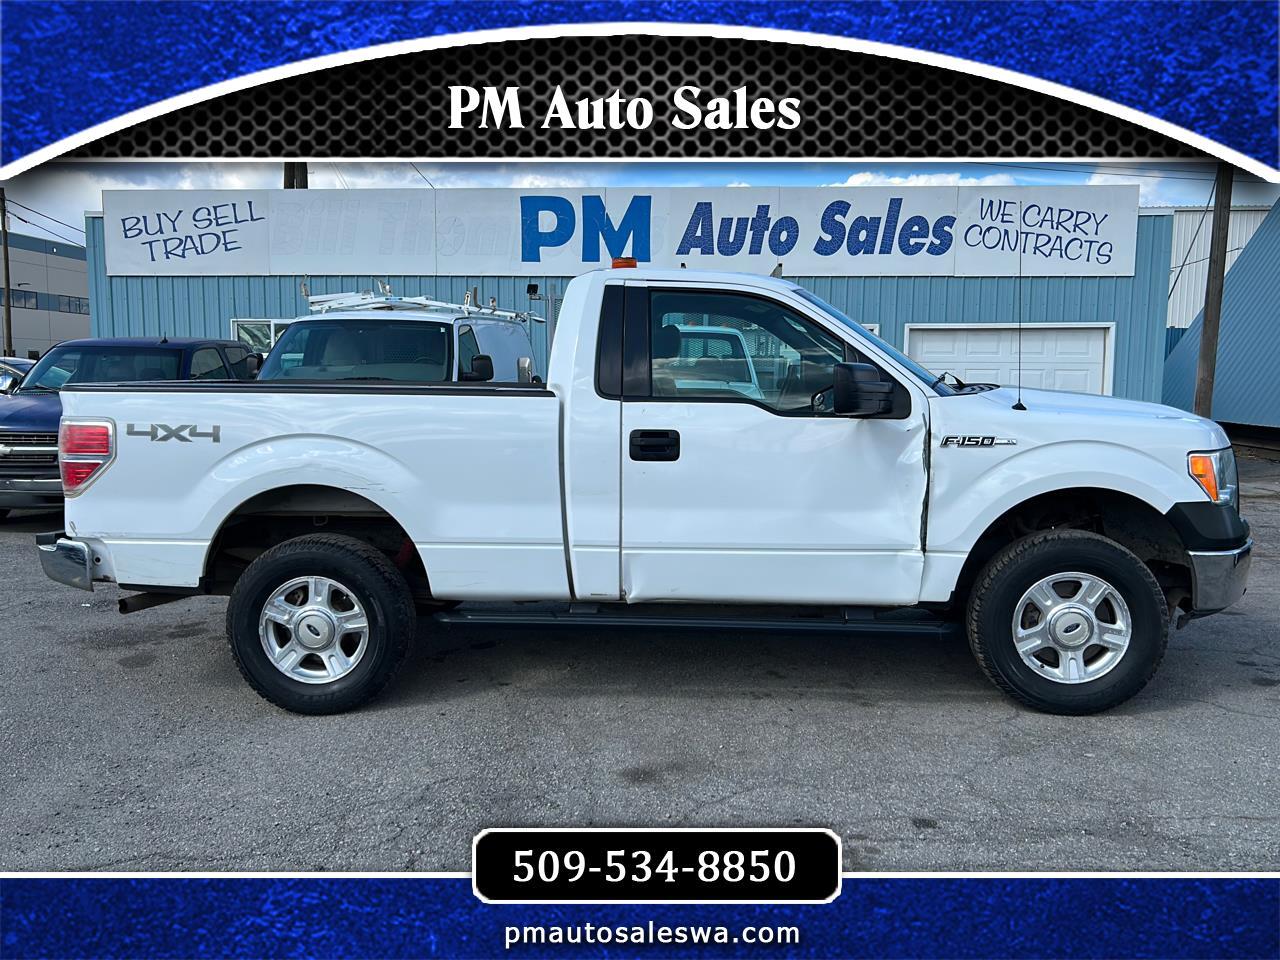 Ford F-150 XLT 8-ft. Bed 4WD 2013